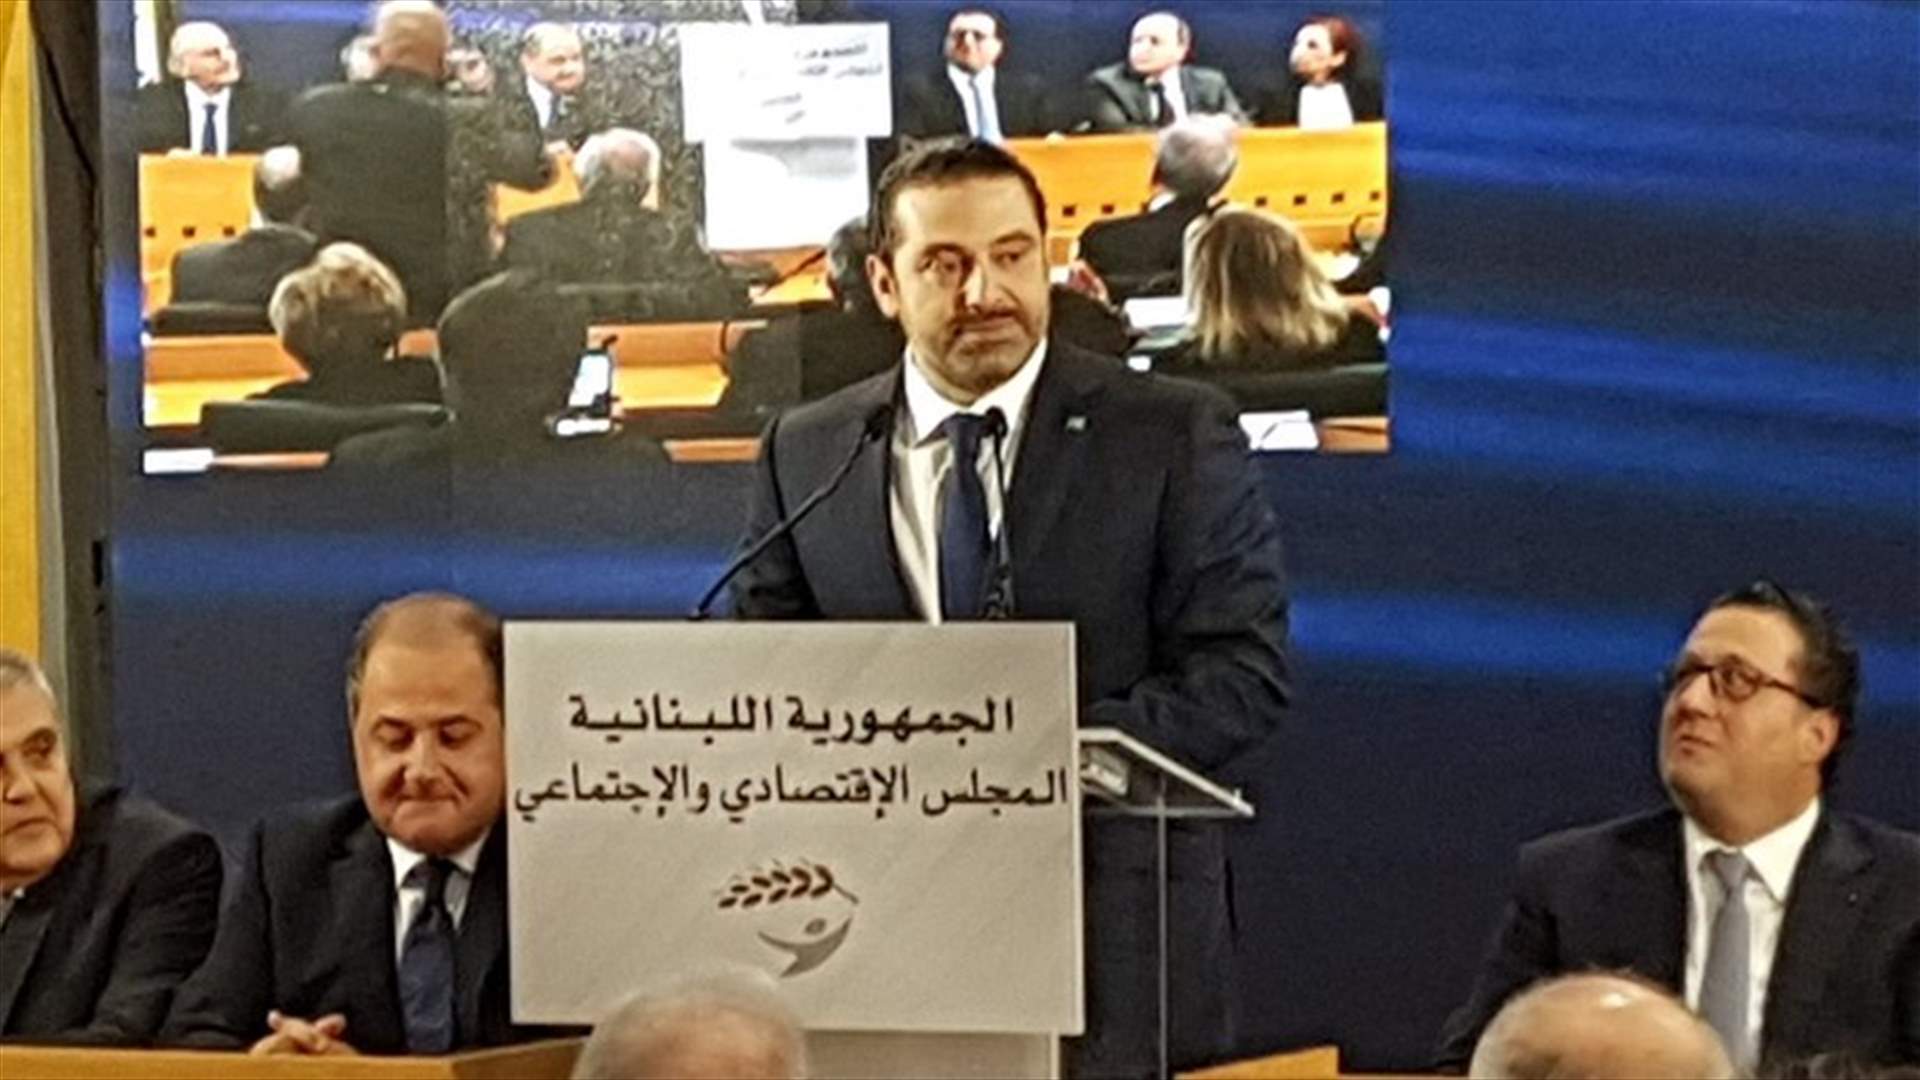 PM Hariri says election of the Economic and Social Council is a new achievement